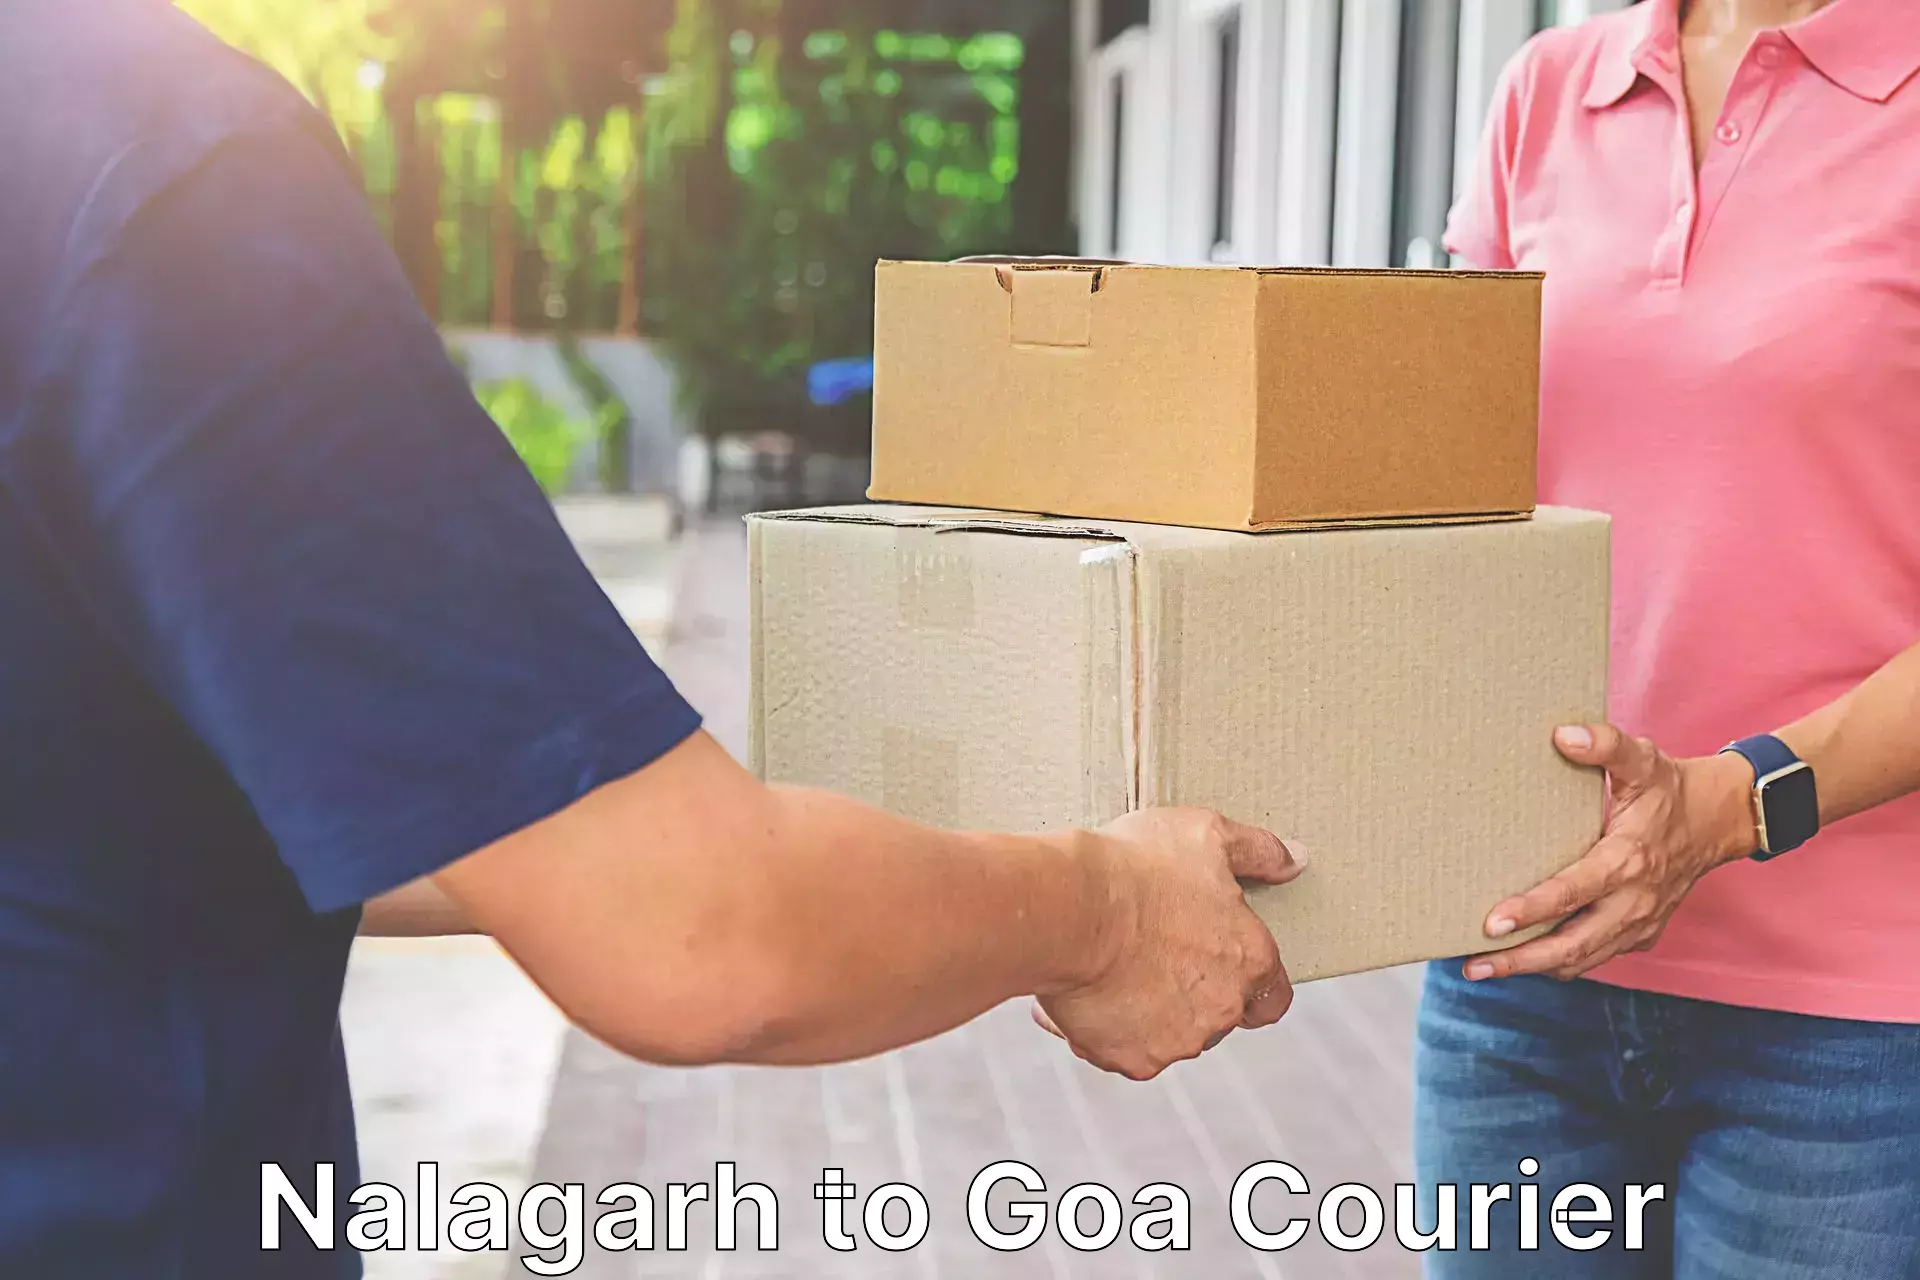 Sustainable delivery practices Nalagarh to Goa